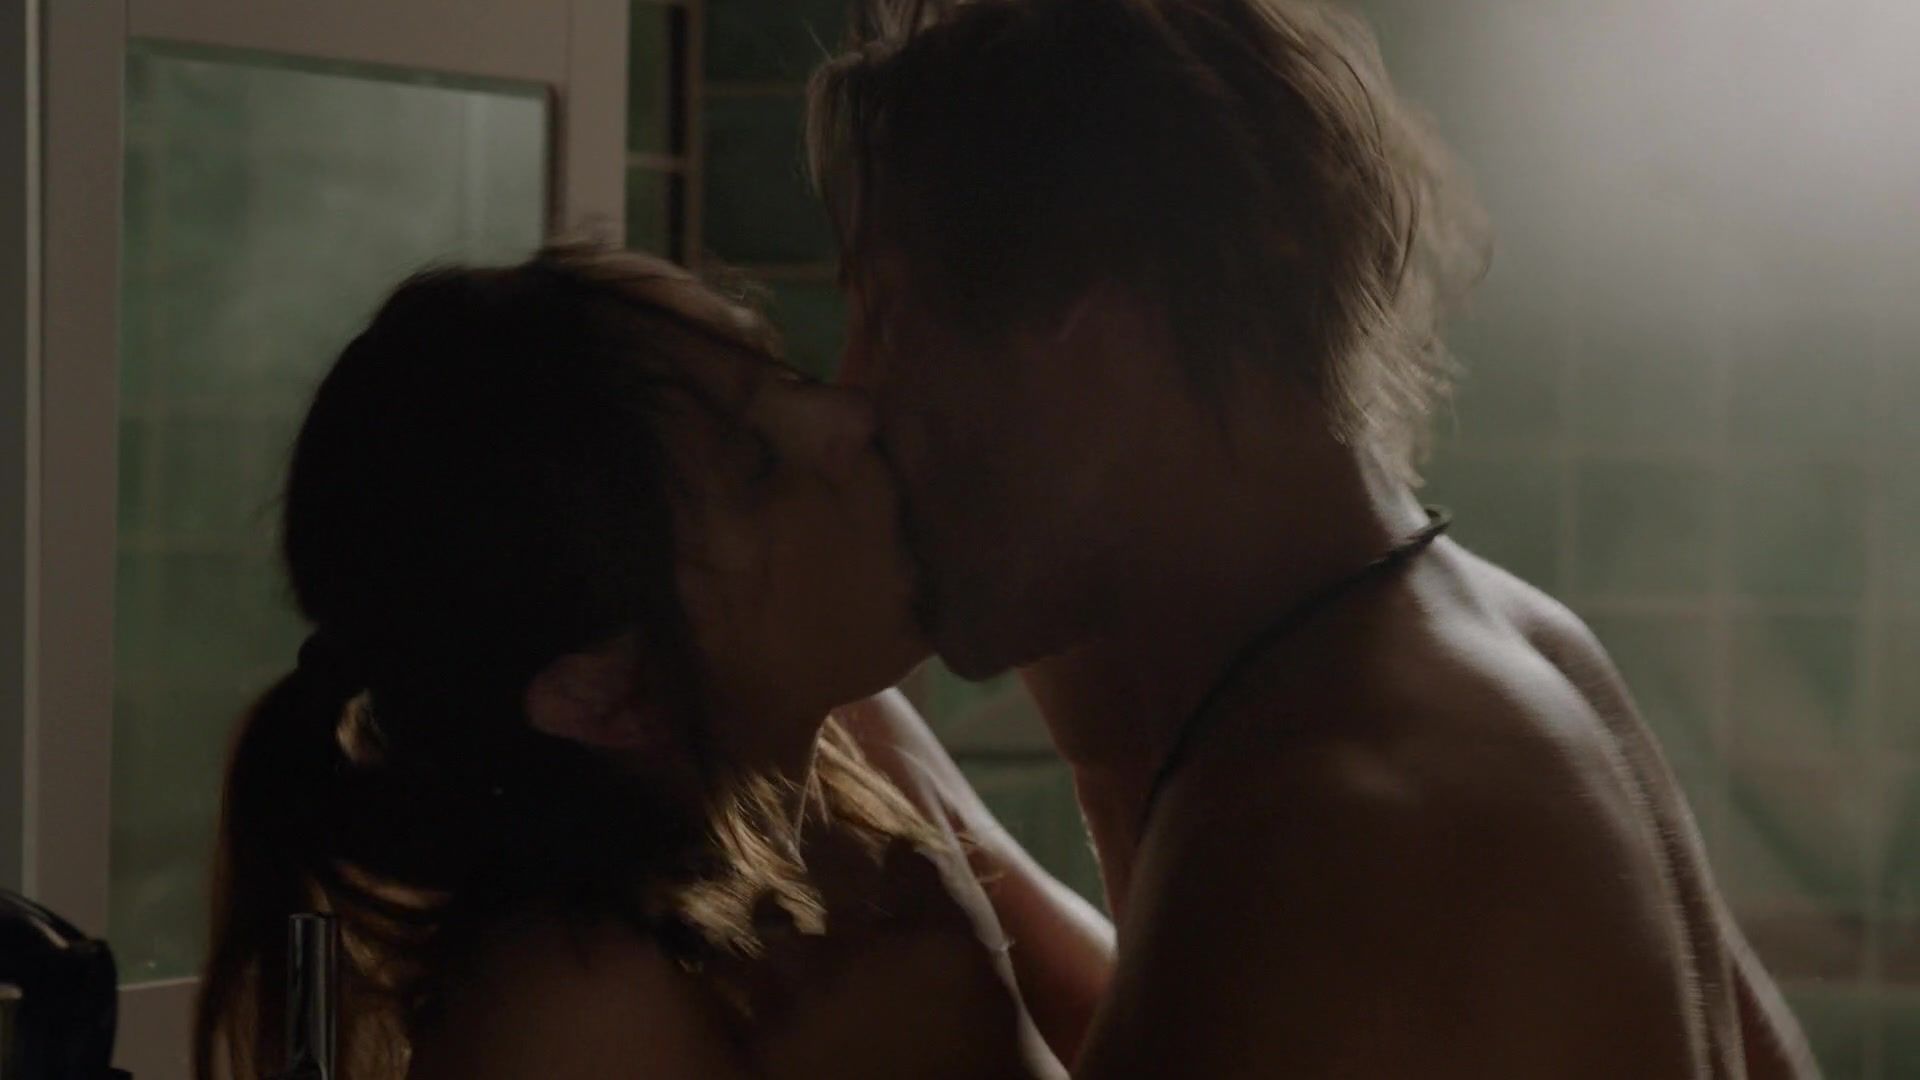 Free Fucking Naked Sarah Wayne Callies in Sex Scene from the TV show "Colony" s01e03 (2016) Glamcore